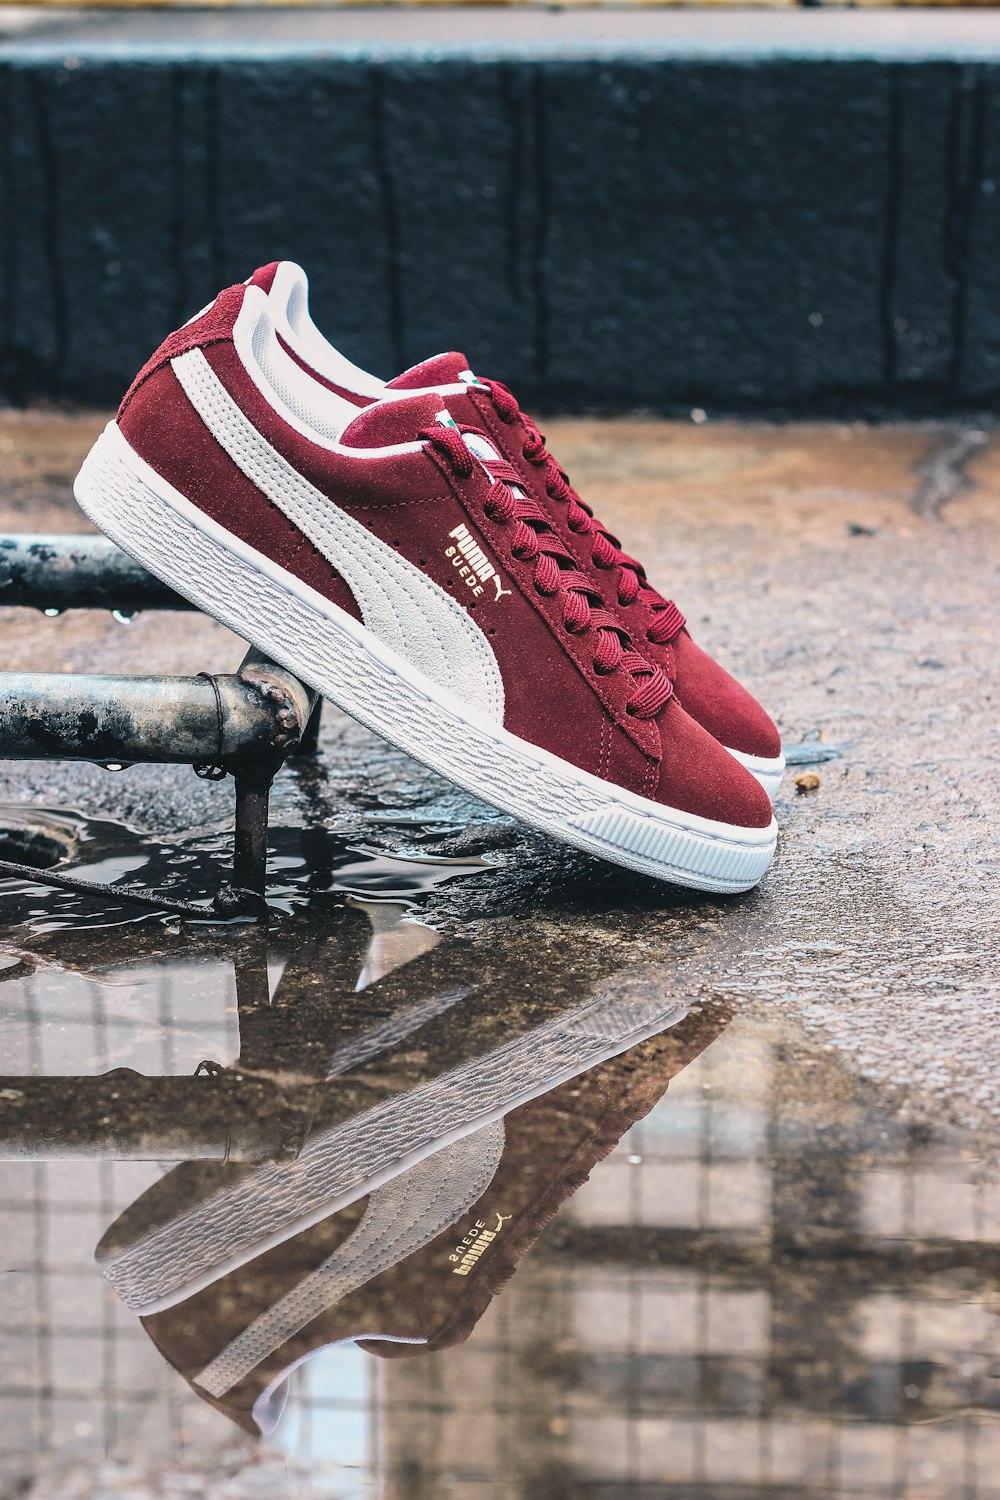 Puma Sneakers Pictures | Download Free Images on Unsplash